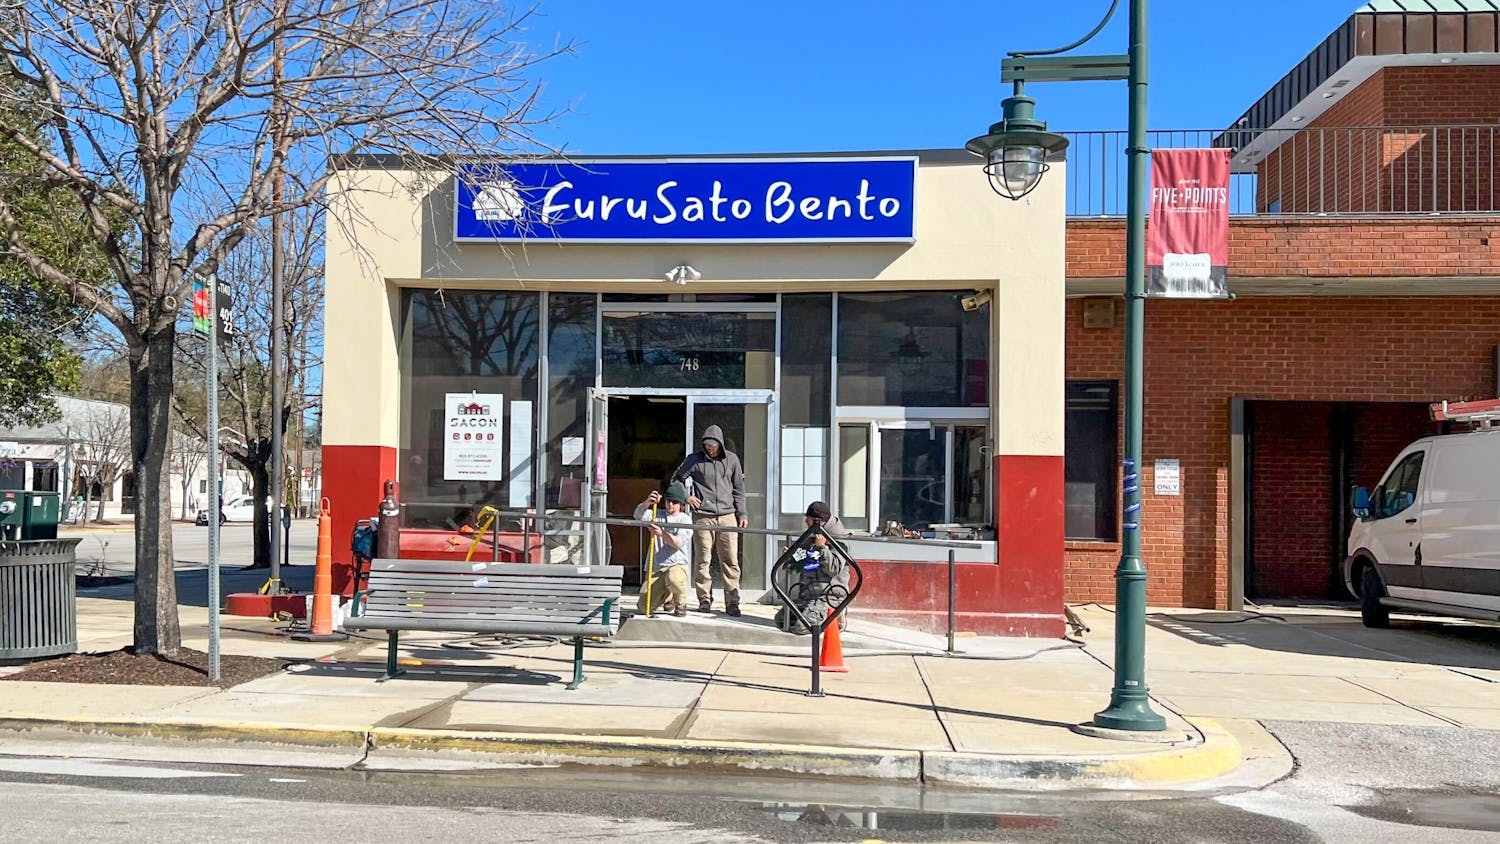 Furusato Bento is currently under construction in Five Points in Columbia, SC. The new restaurant, from the owners of Menkoi Ramen House, will feature Japanese-inspired bento boxes and Japanese drinks and snacks.